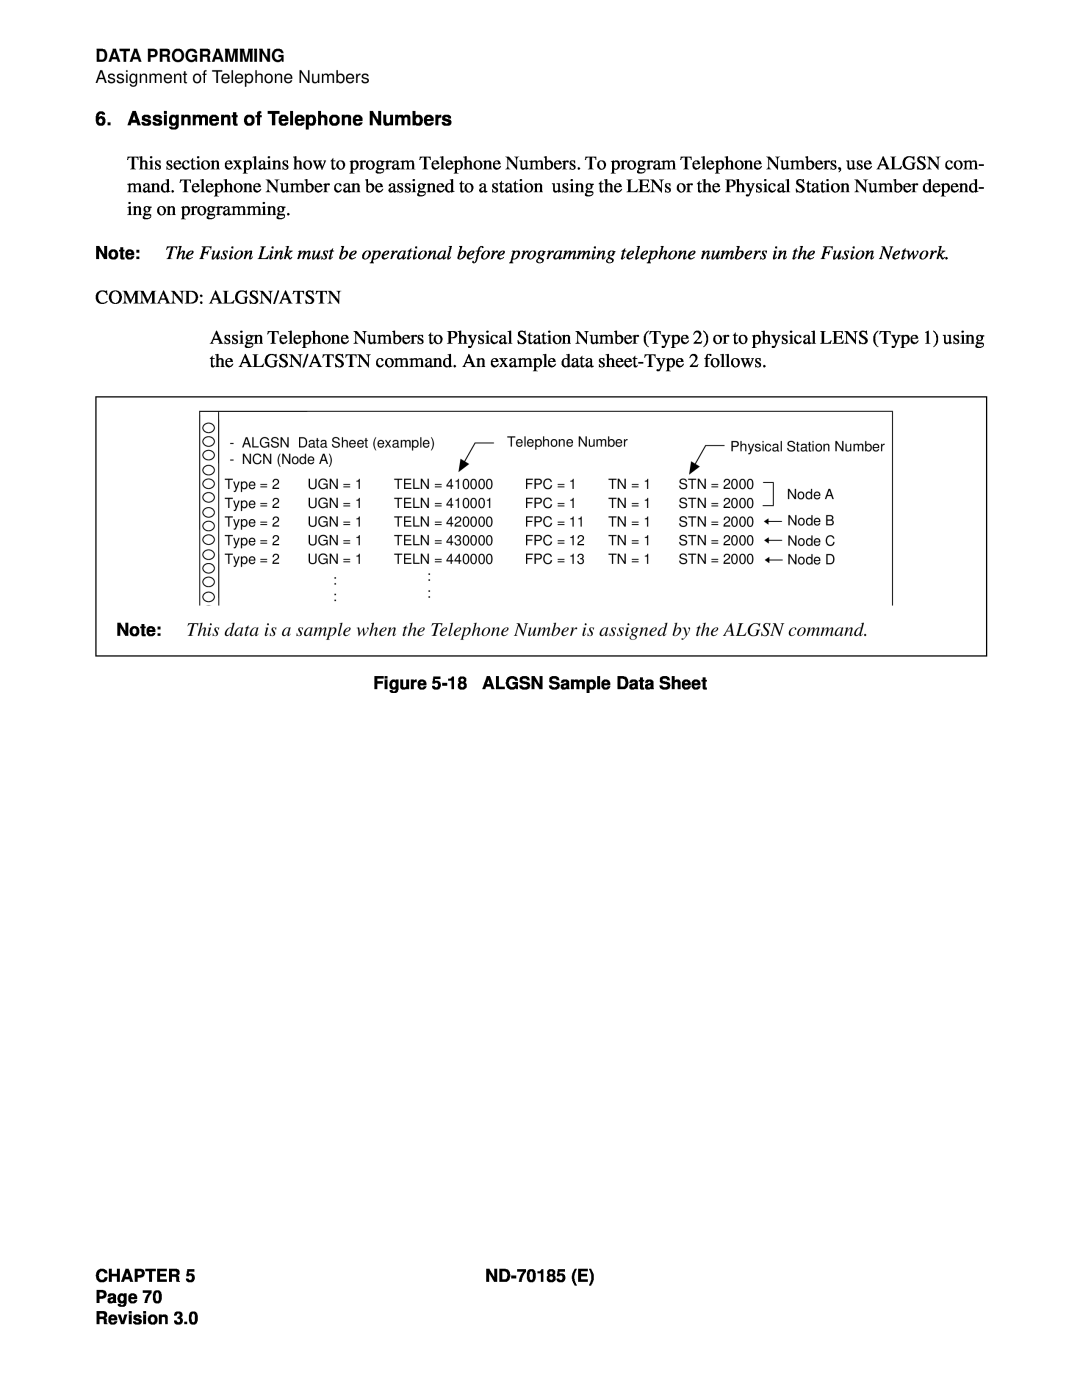 NEC NEAX2400 system manual Assignment of Telephone Numbers 